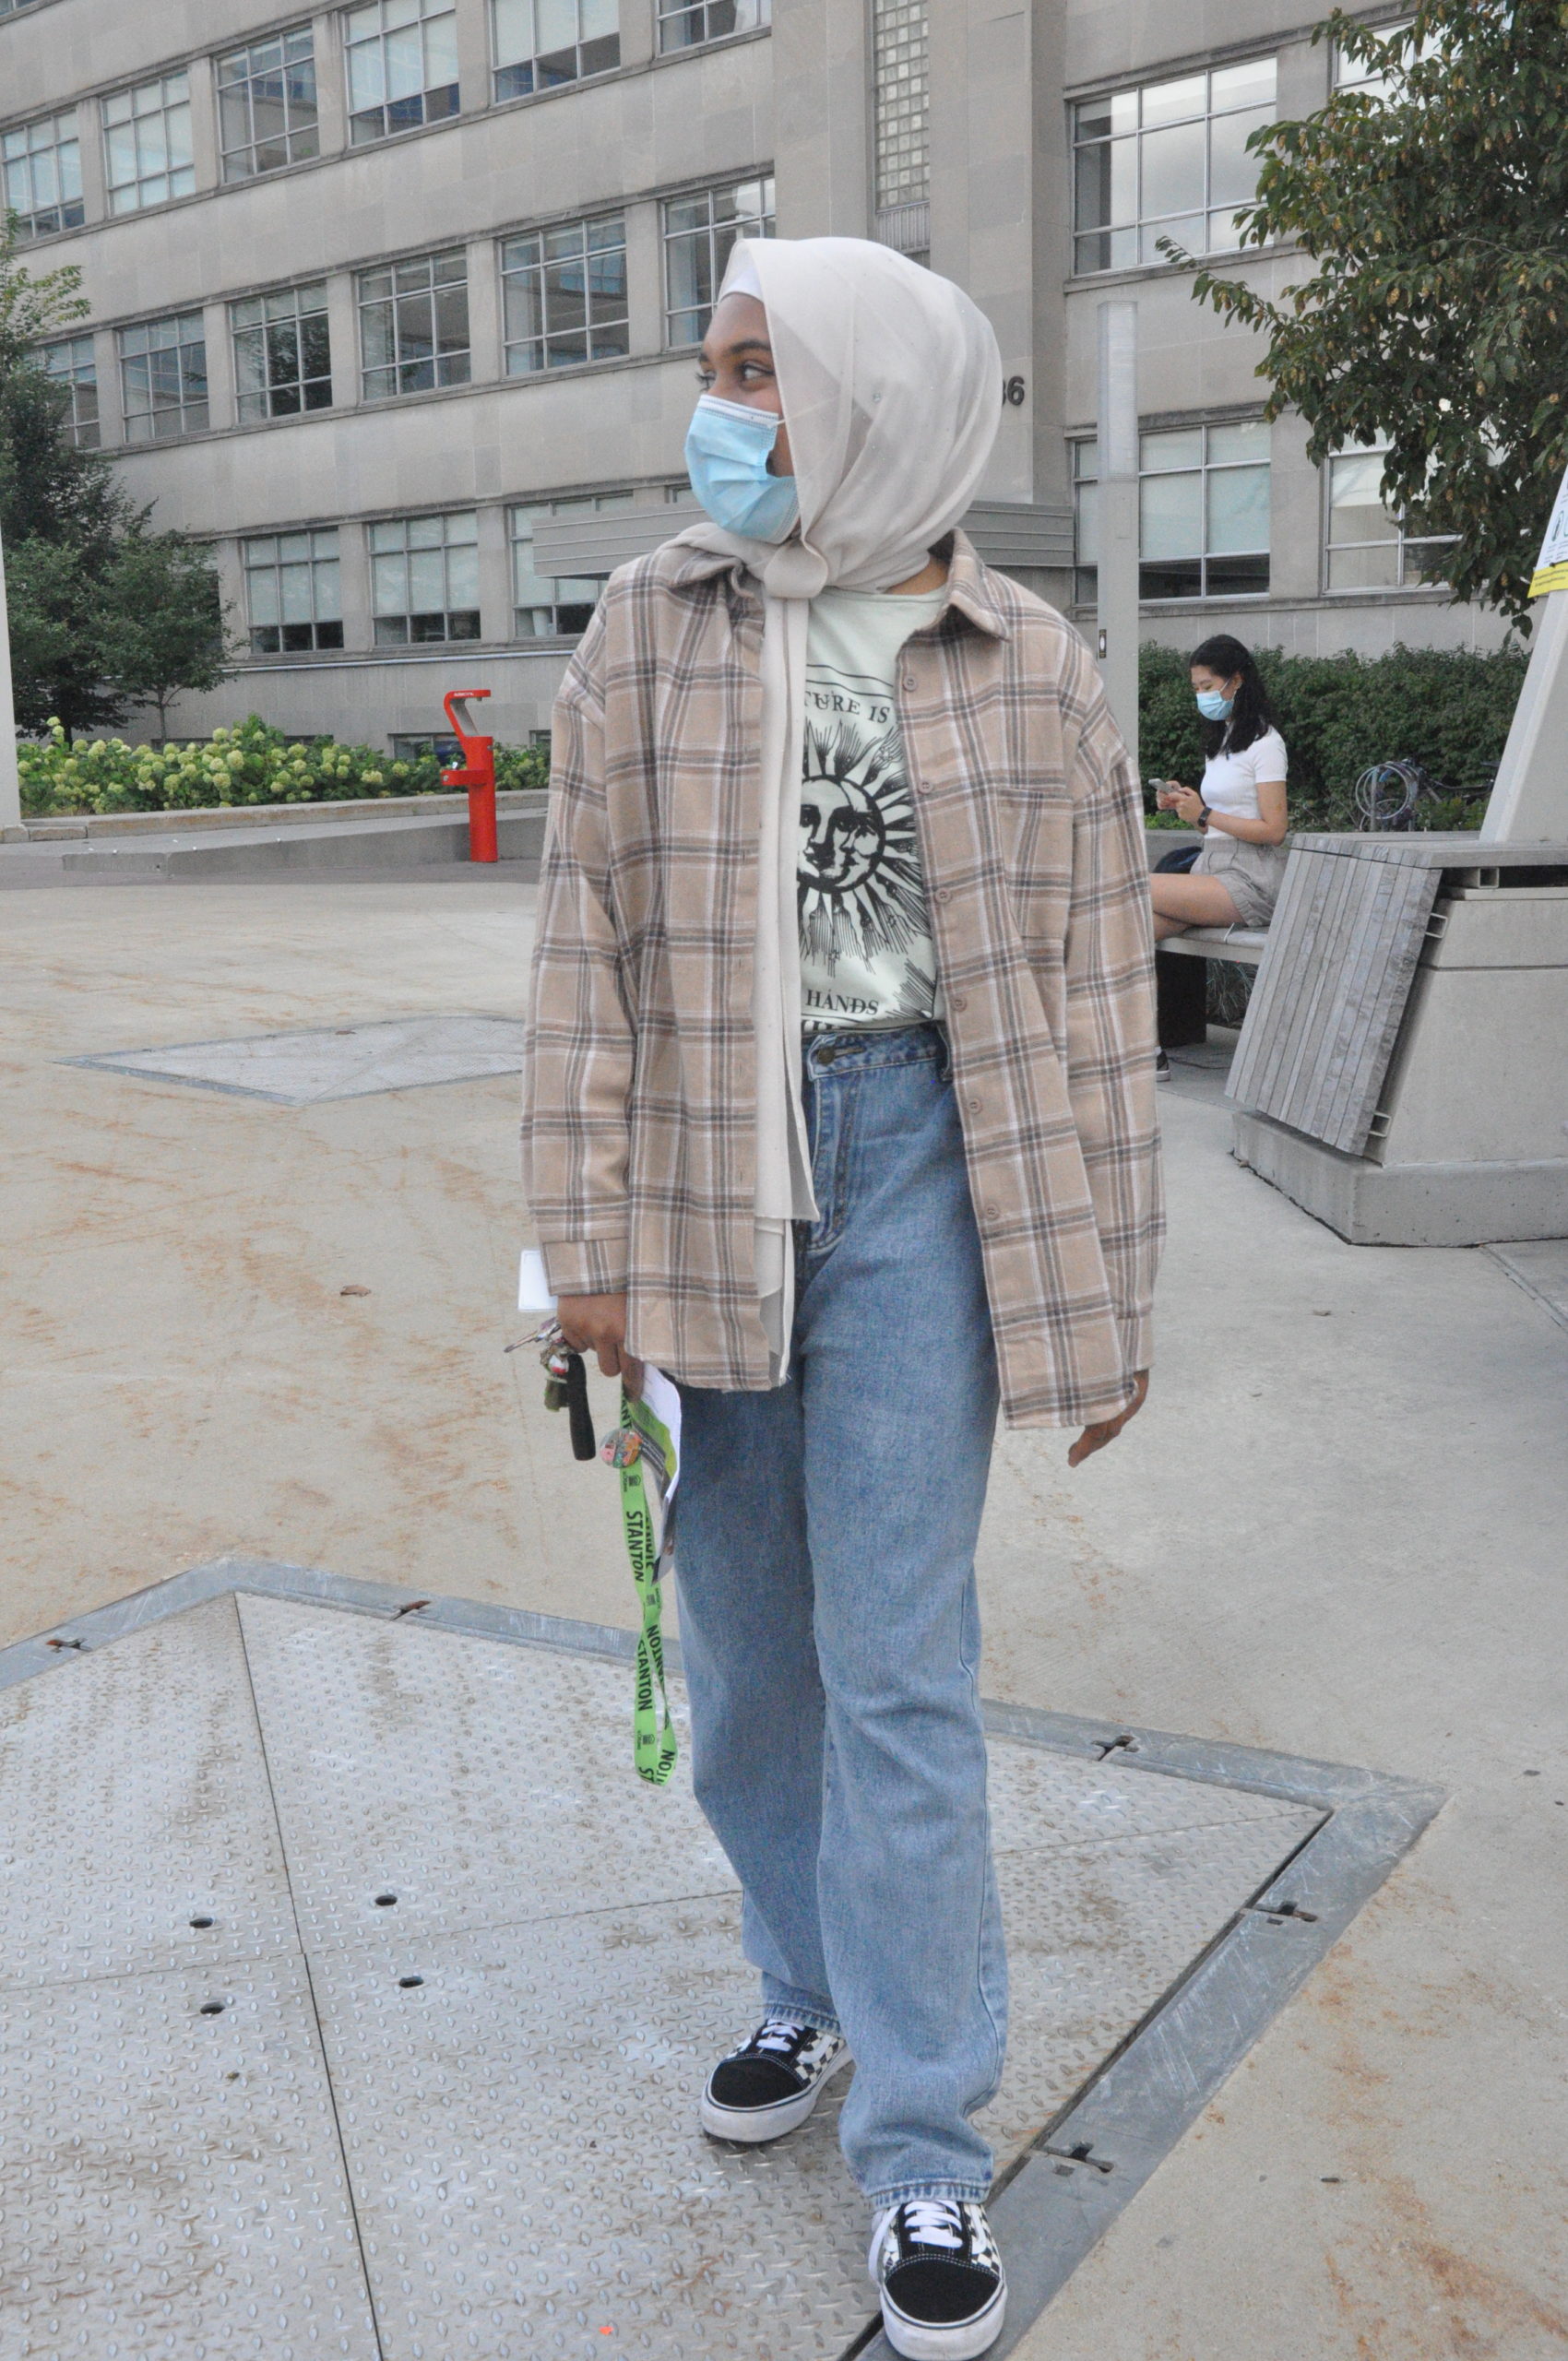 Student posing on campus wearing a beige flannel and light blue jeans